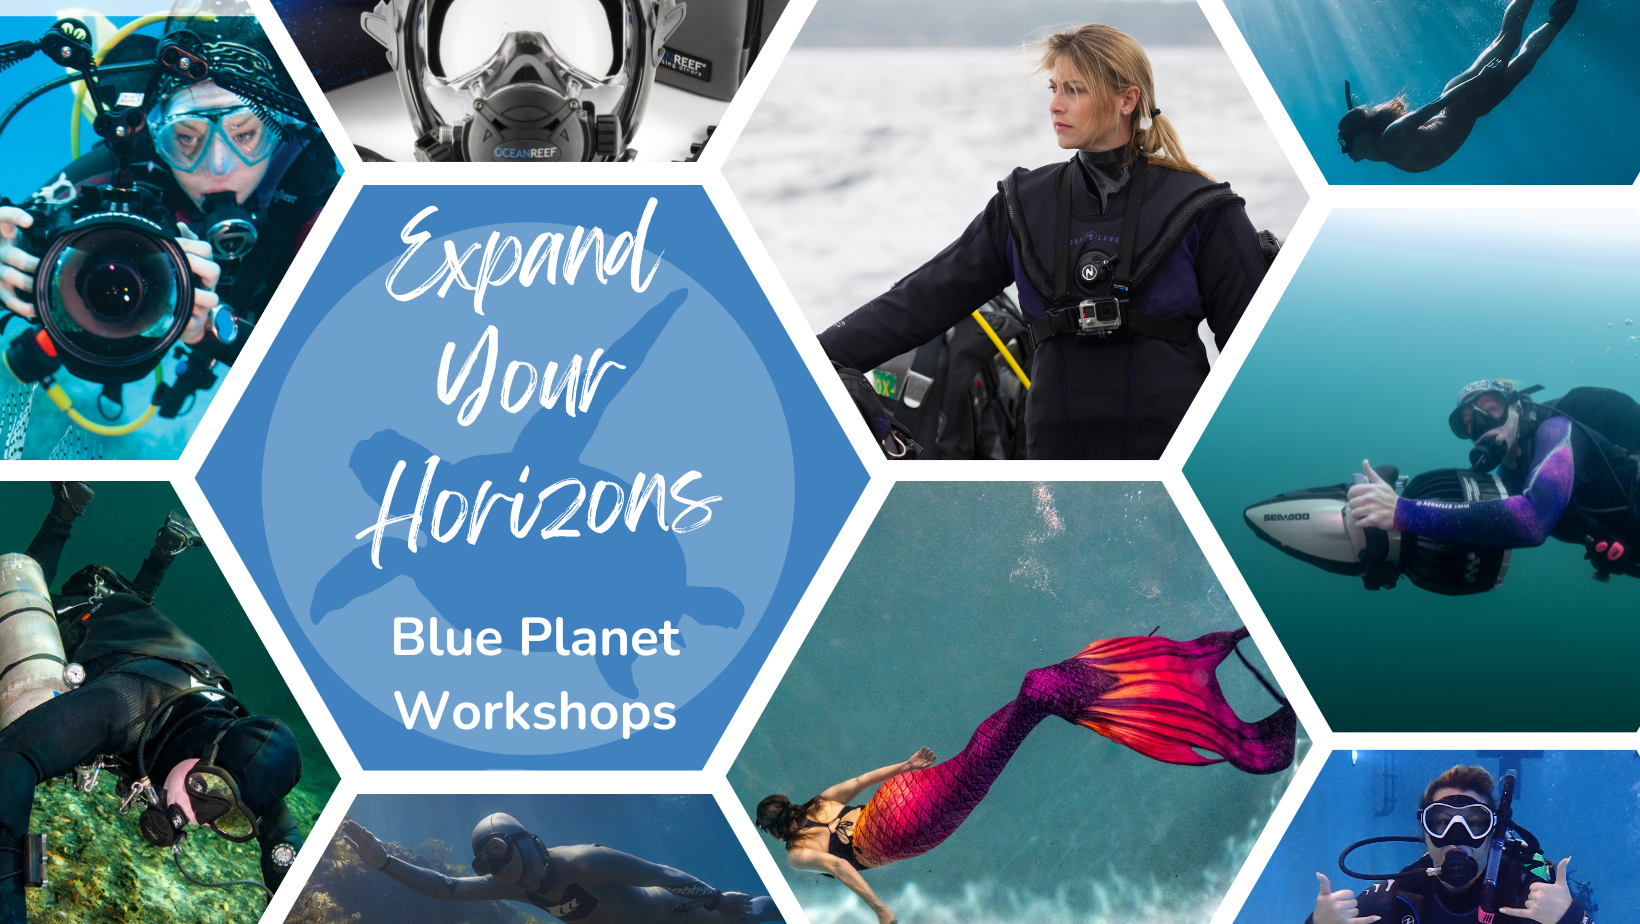 Expand Your Horizons With Blue Planet's Workshop Series